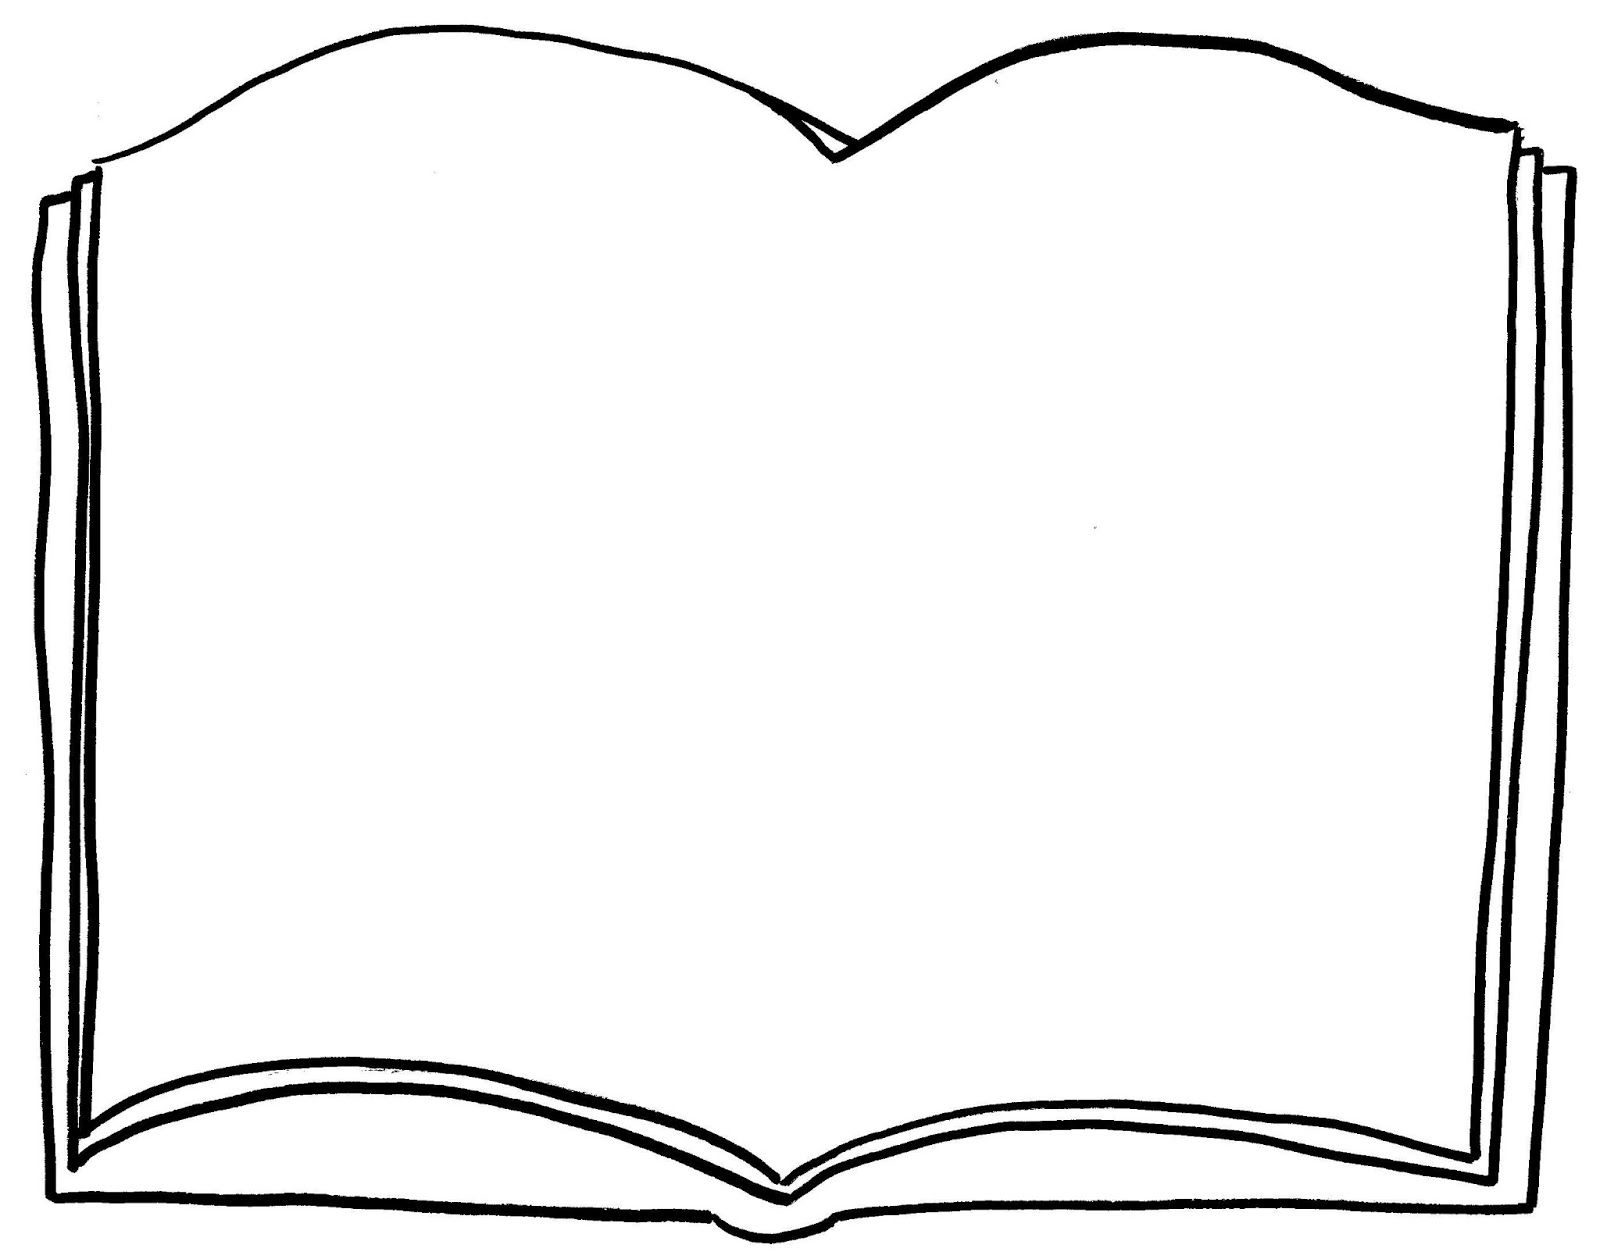 Best Photos of Blank Open Book Coloring Page - Open Book Coloring ...